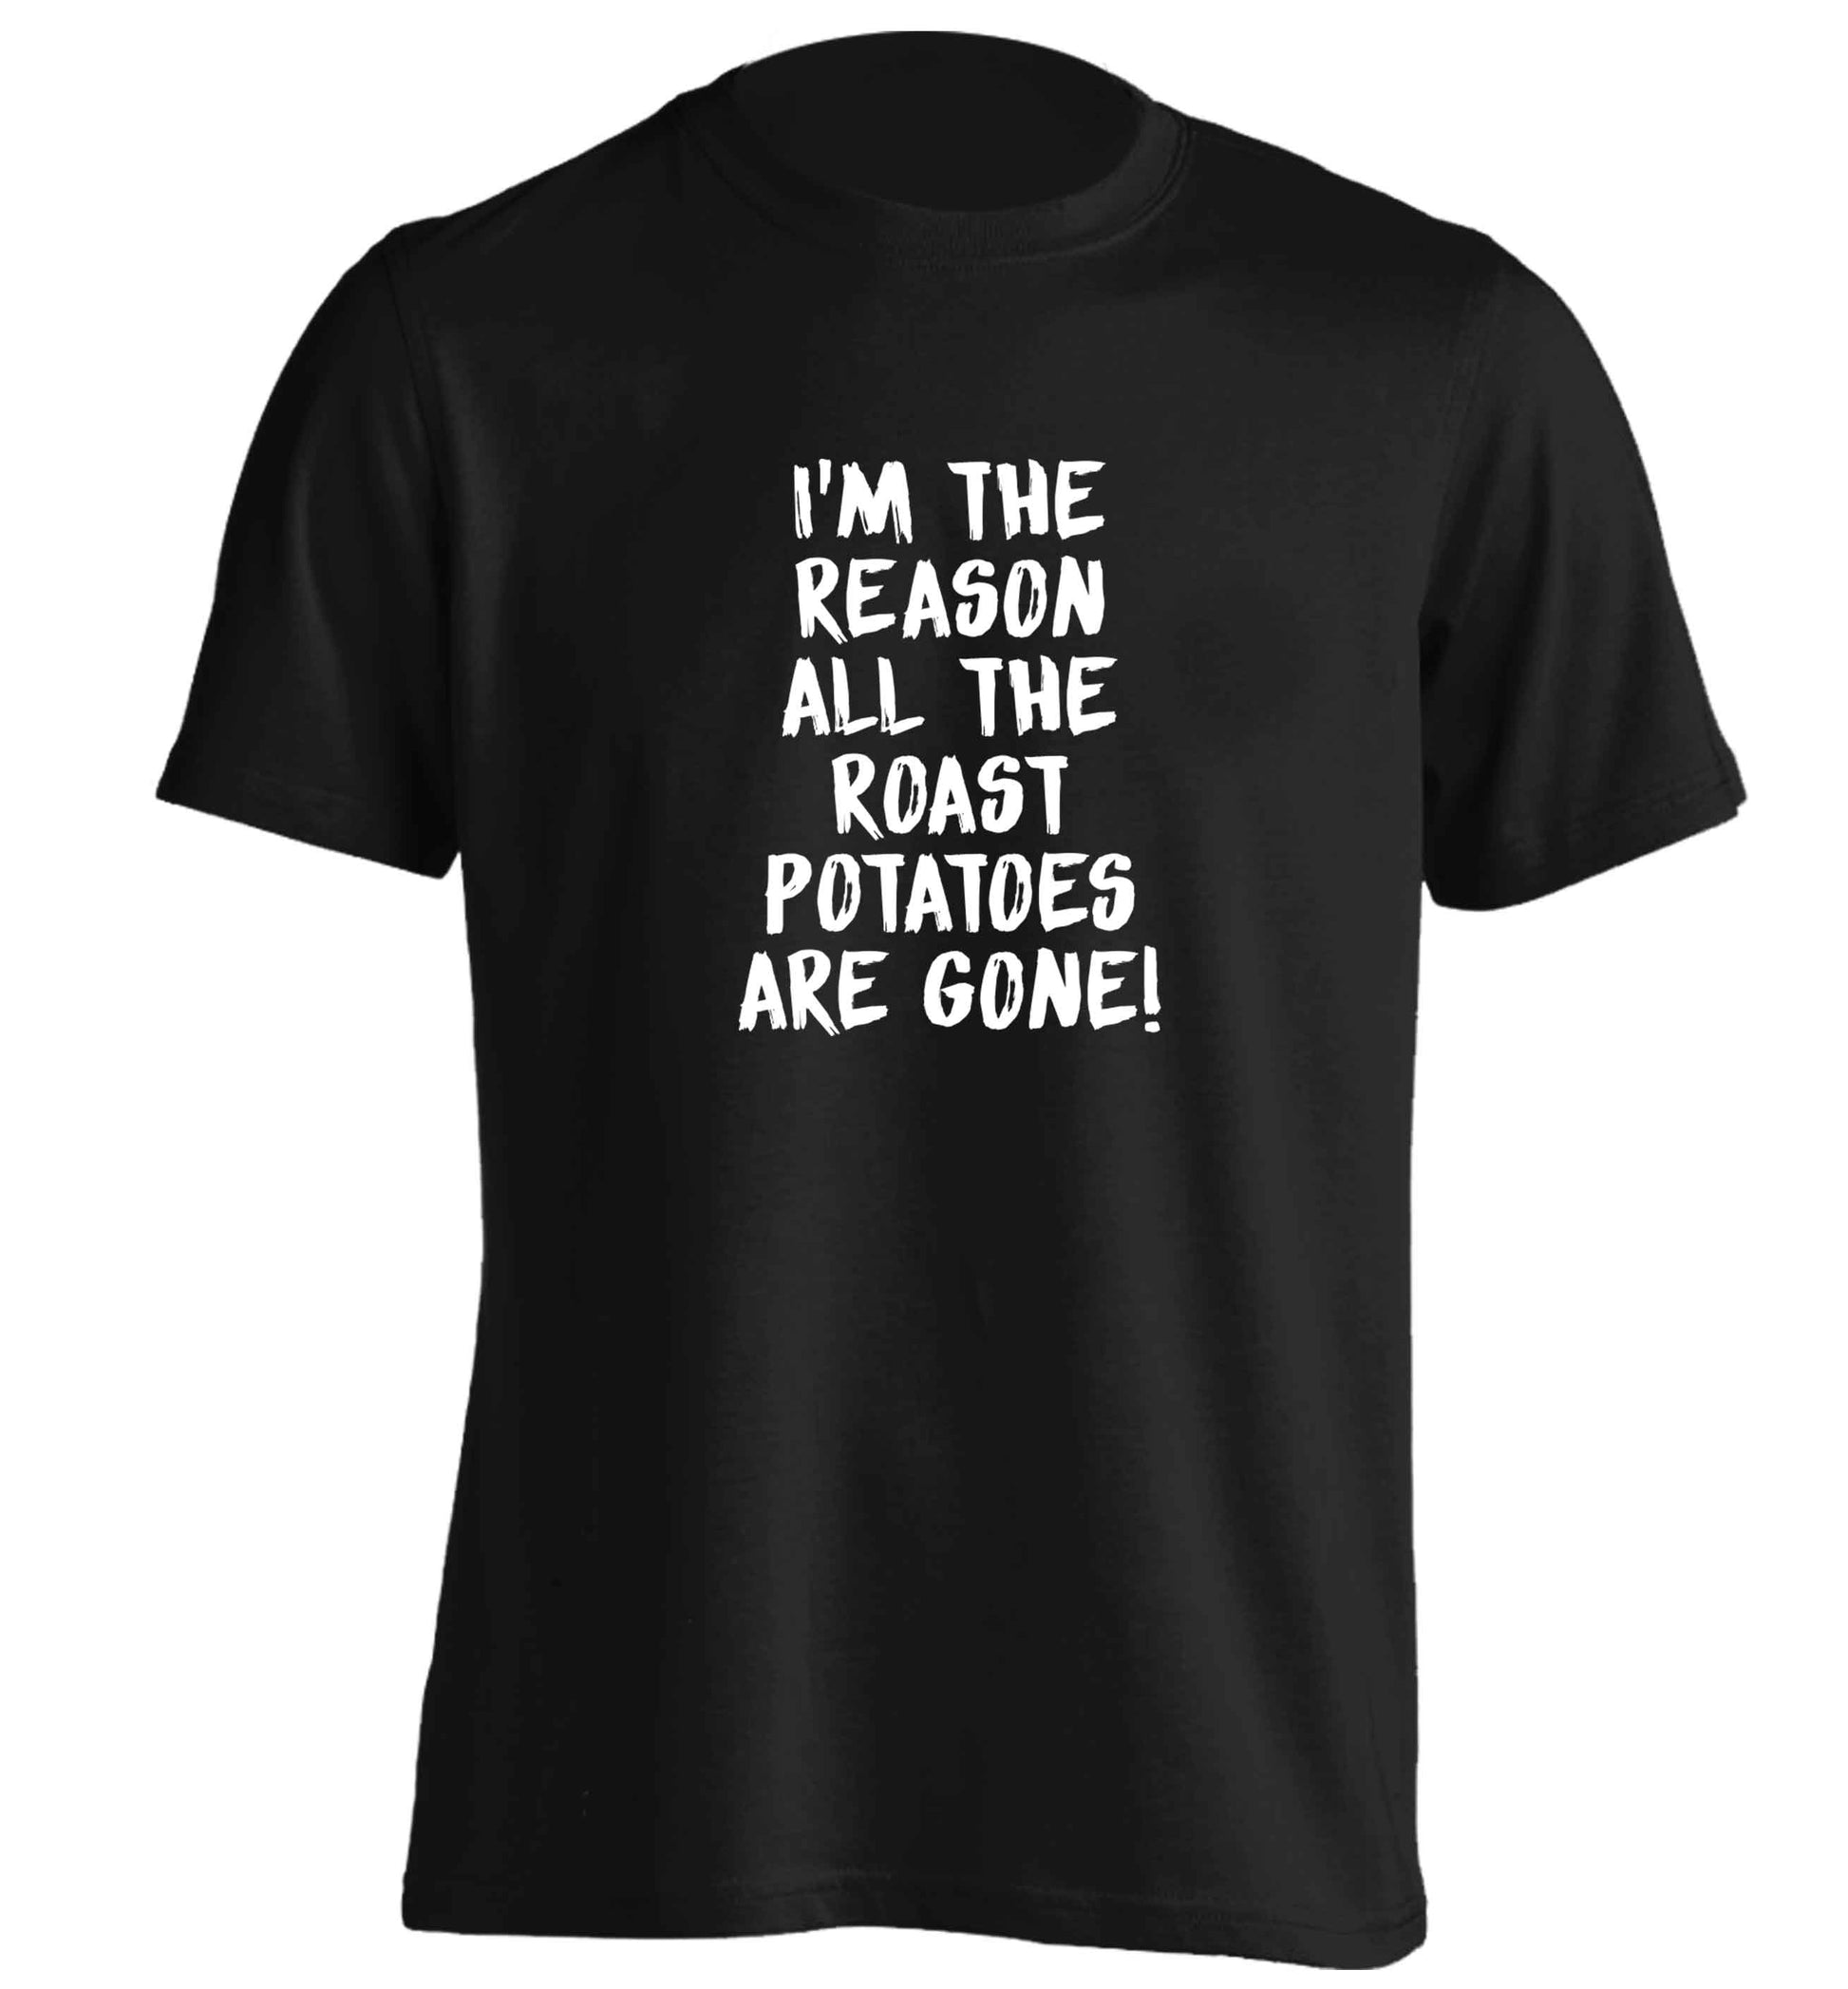 I'm the reason all the roast potatoes are gone adults unisex black Tshirt 2XL